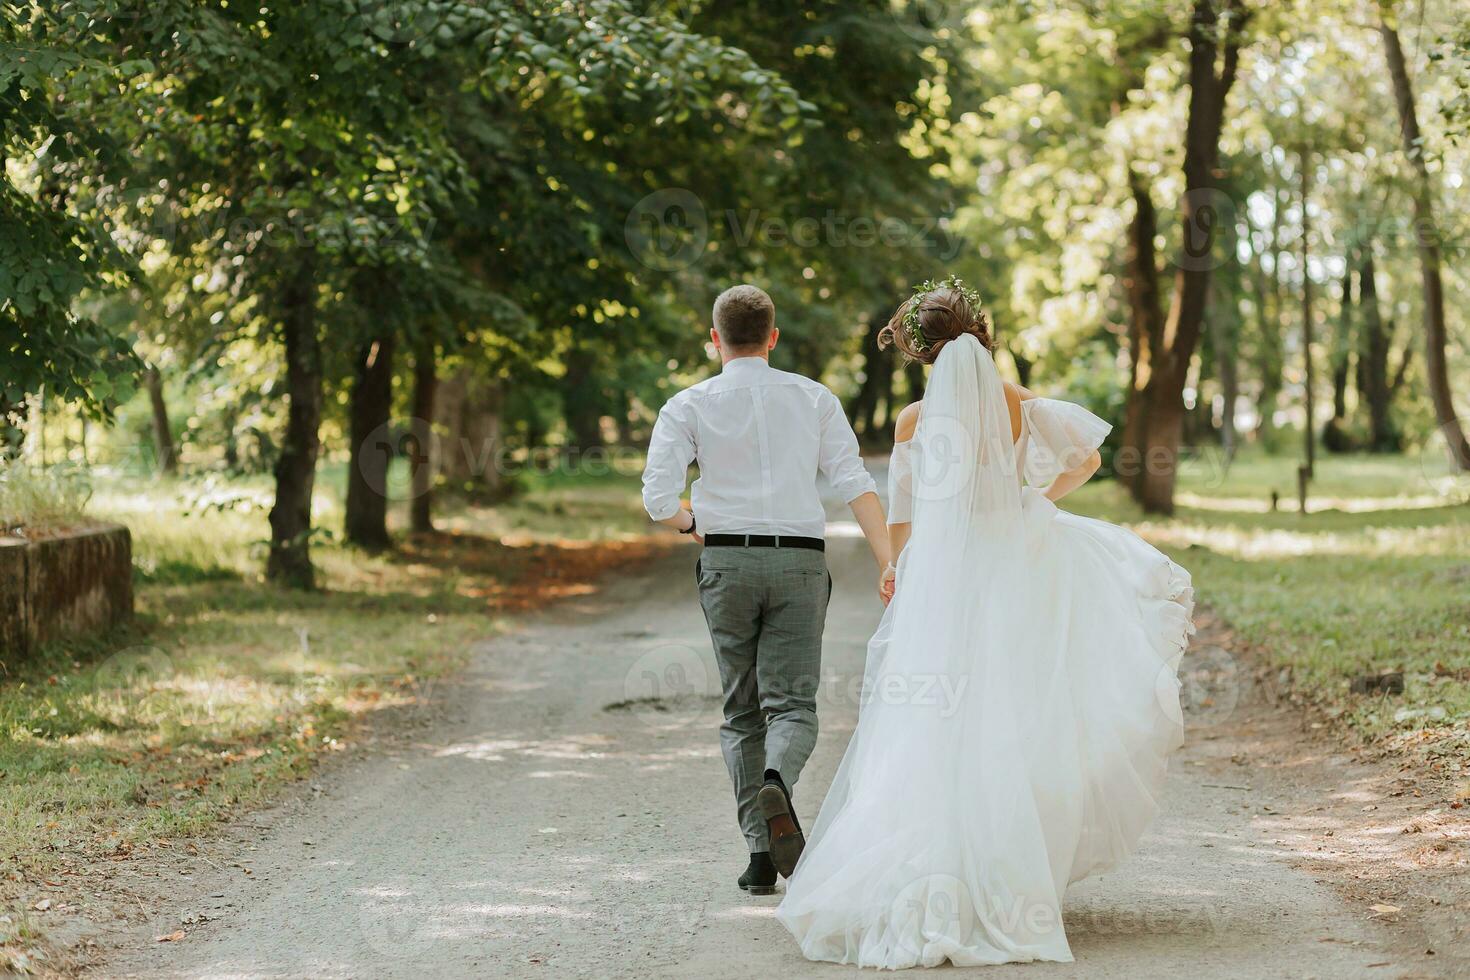 A wedding couple, a happy bride and groom are running in the park to the place of the wedding ceremony. Wedding concept photo